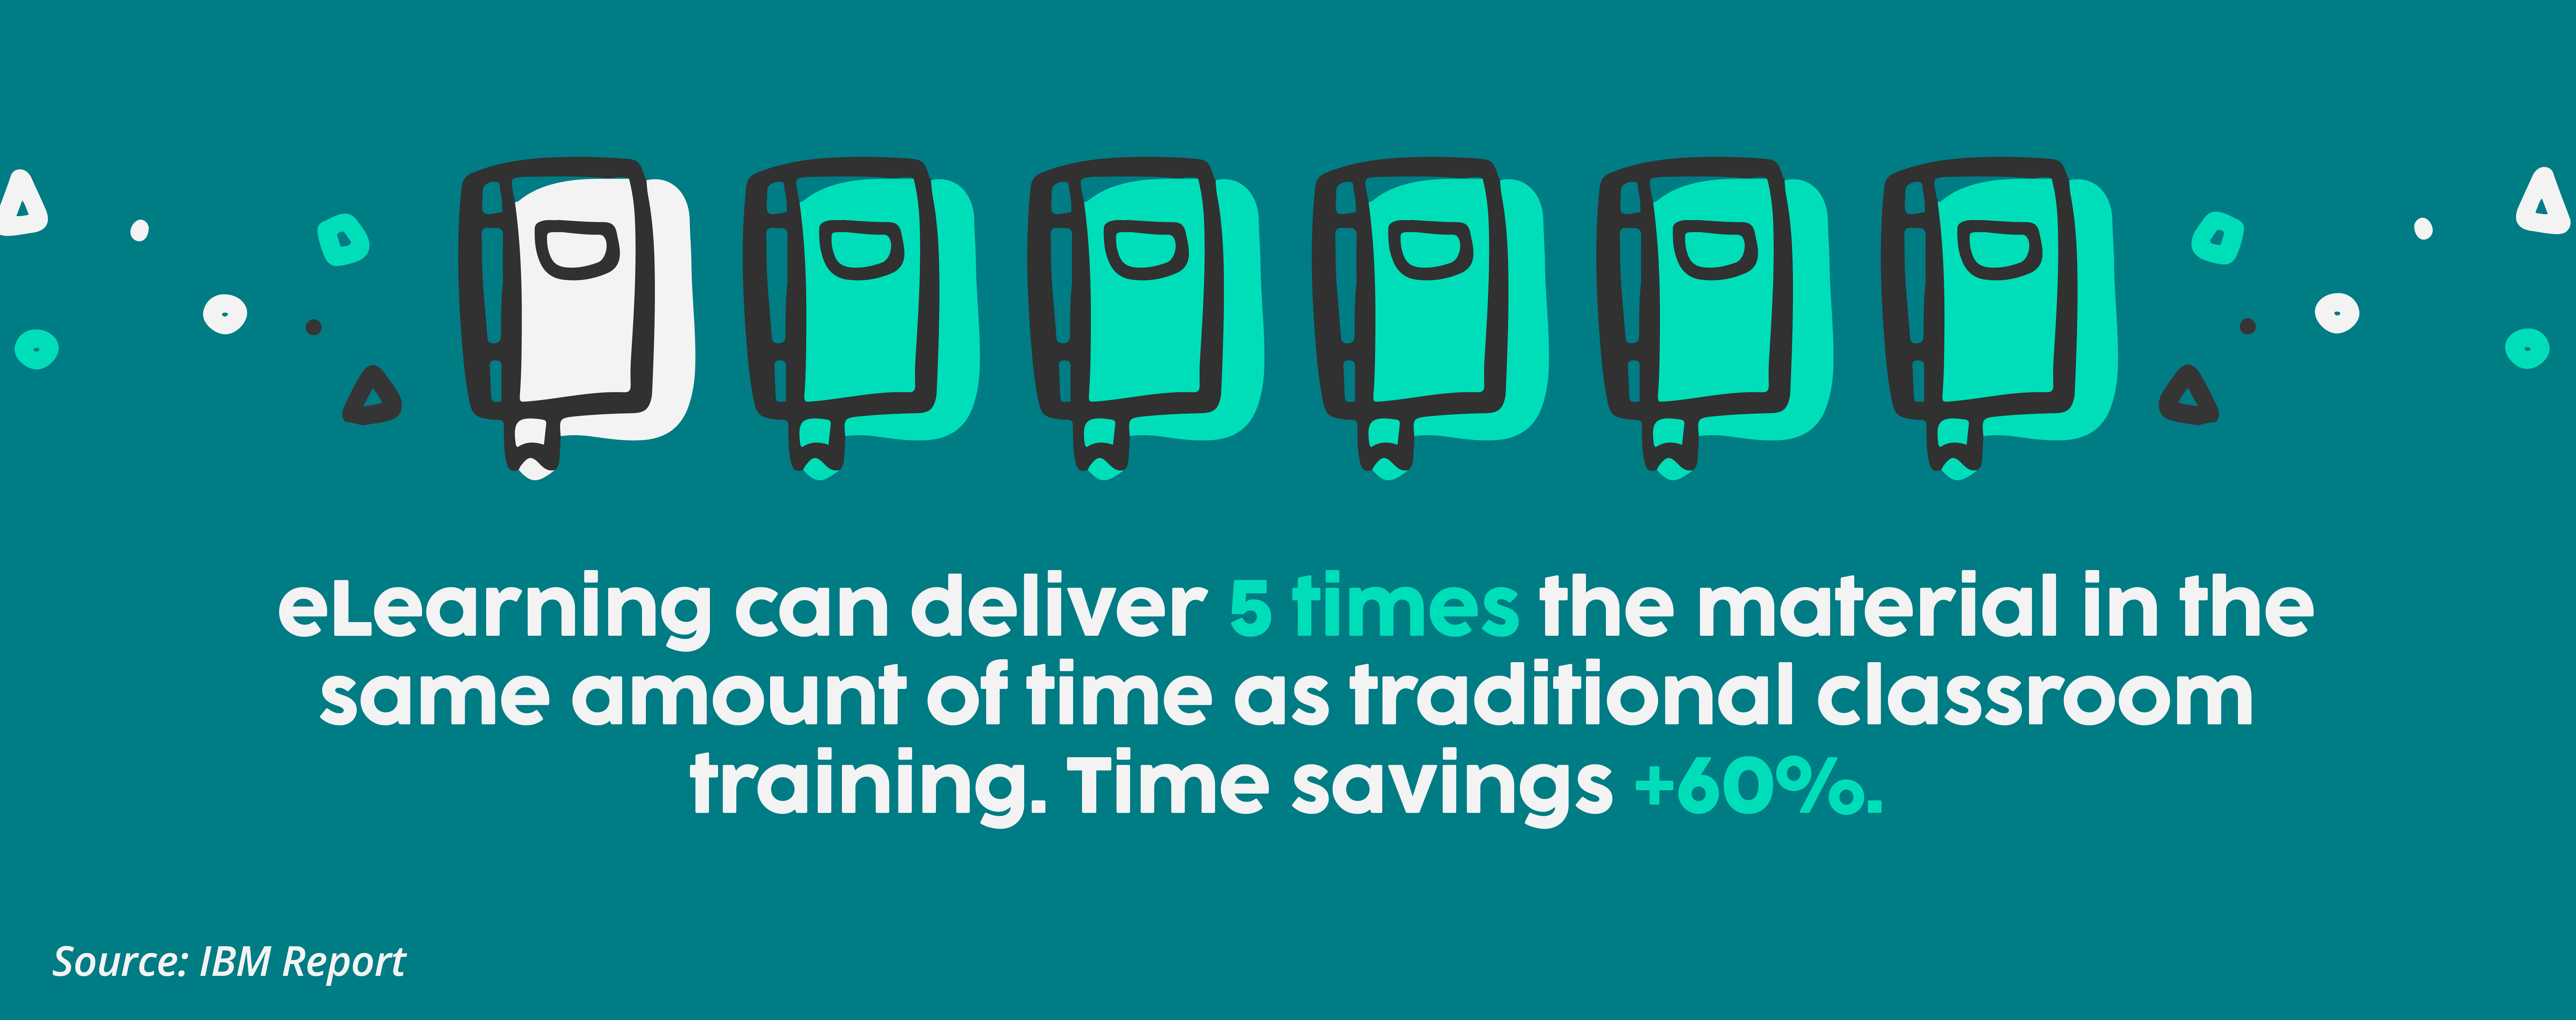 IBM reported that eLearning can deliver nearly five times the material in the same amount of time as traditional classroom training, resulting in time savings of up to 60%.